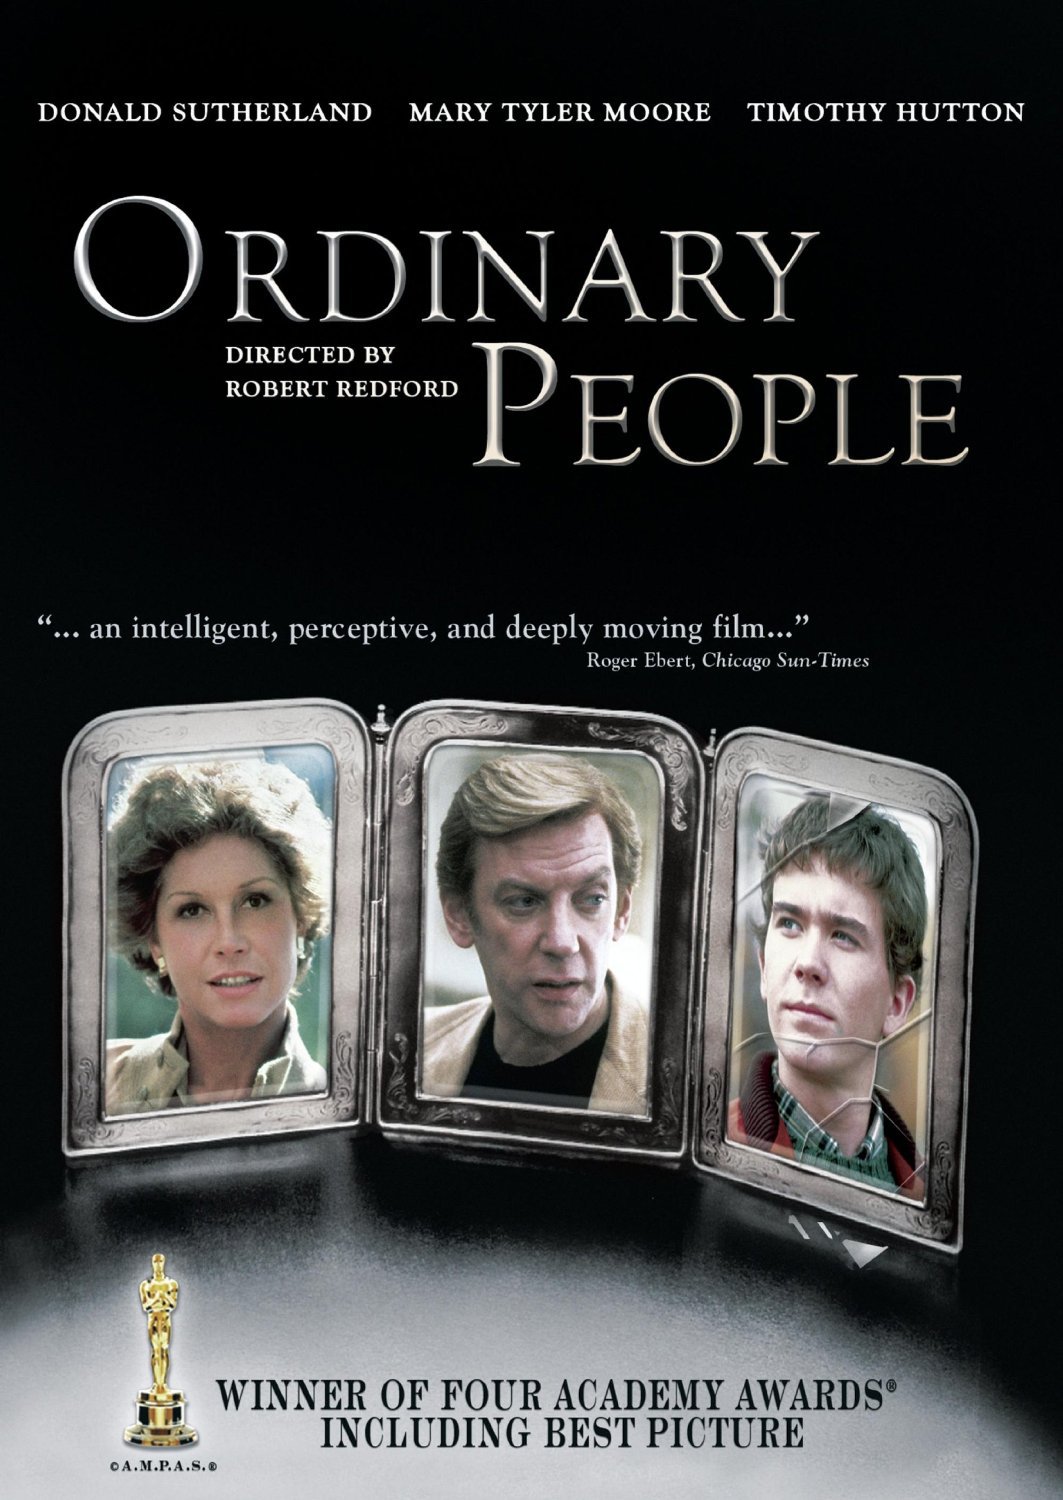 Ordinary People (1980)-Movies on Mental illness which Everyone Should Watch